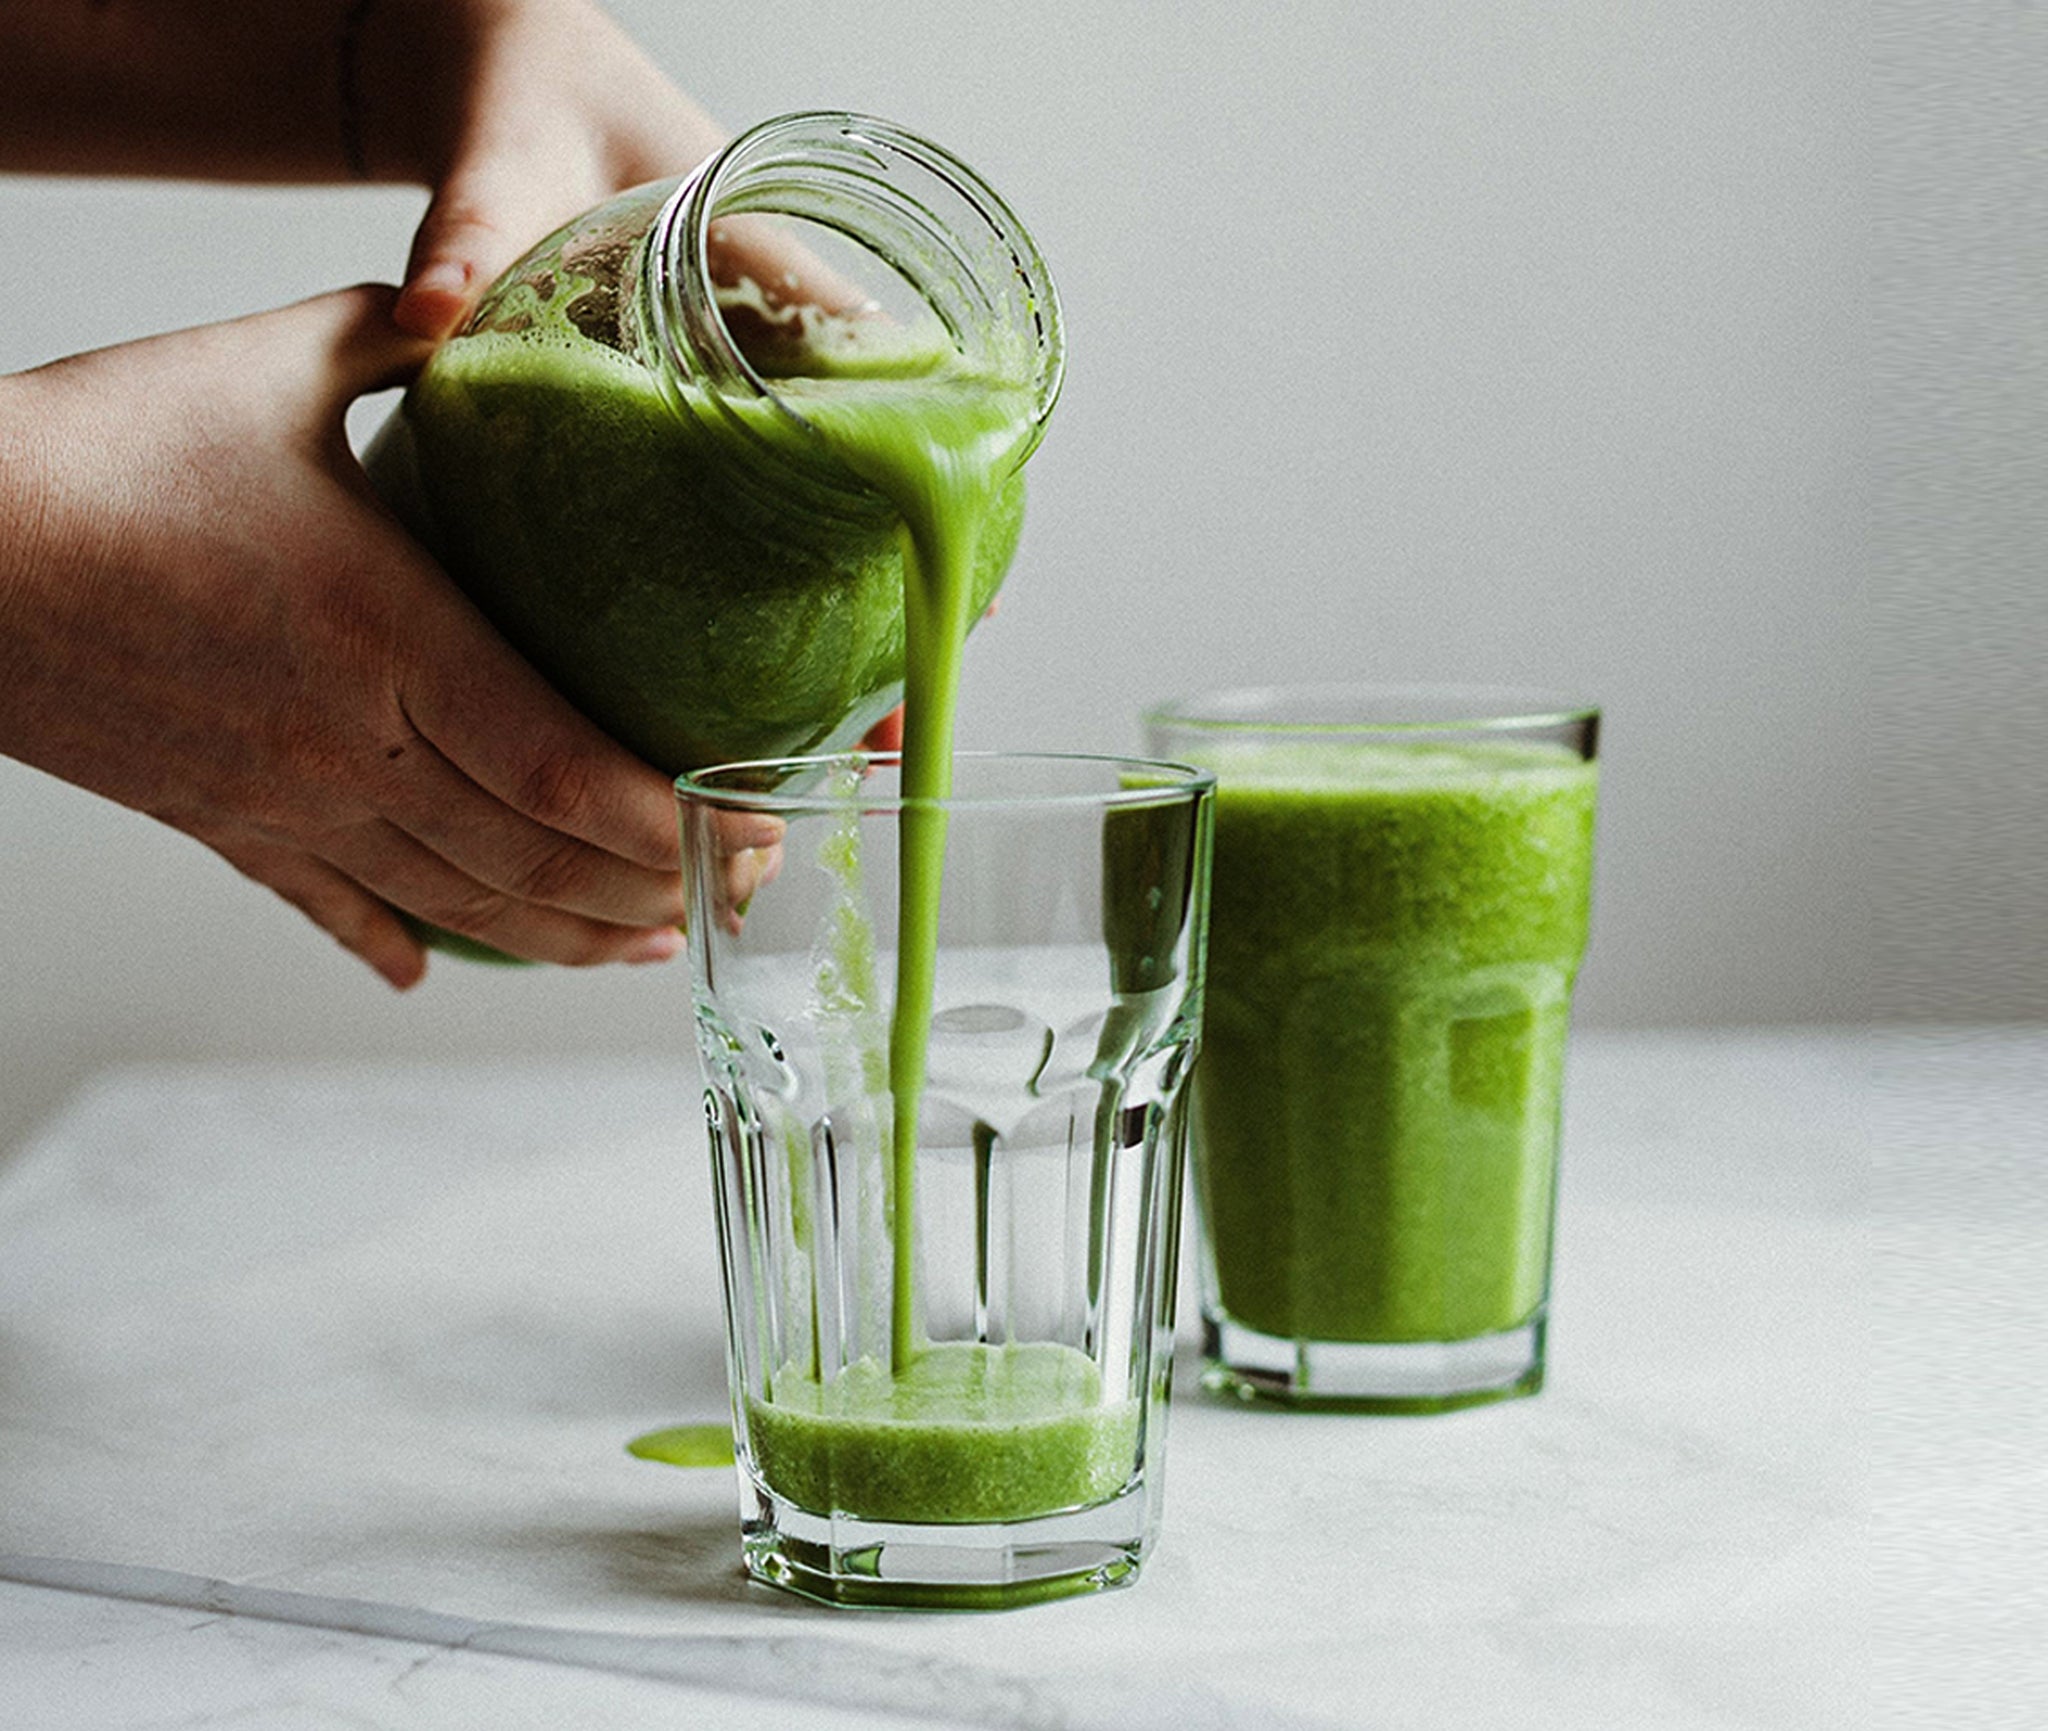 Bud's Top 3 Fertility Boosting Smoothies